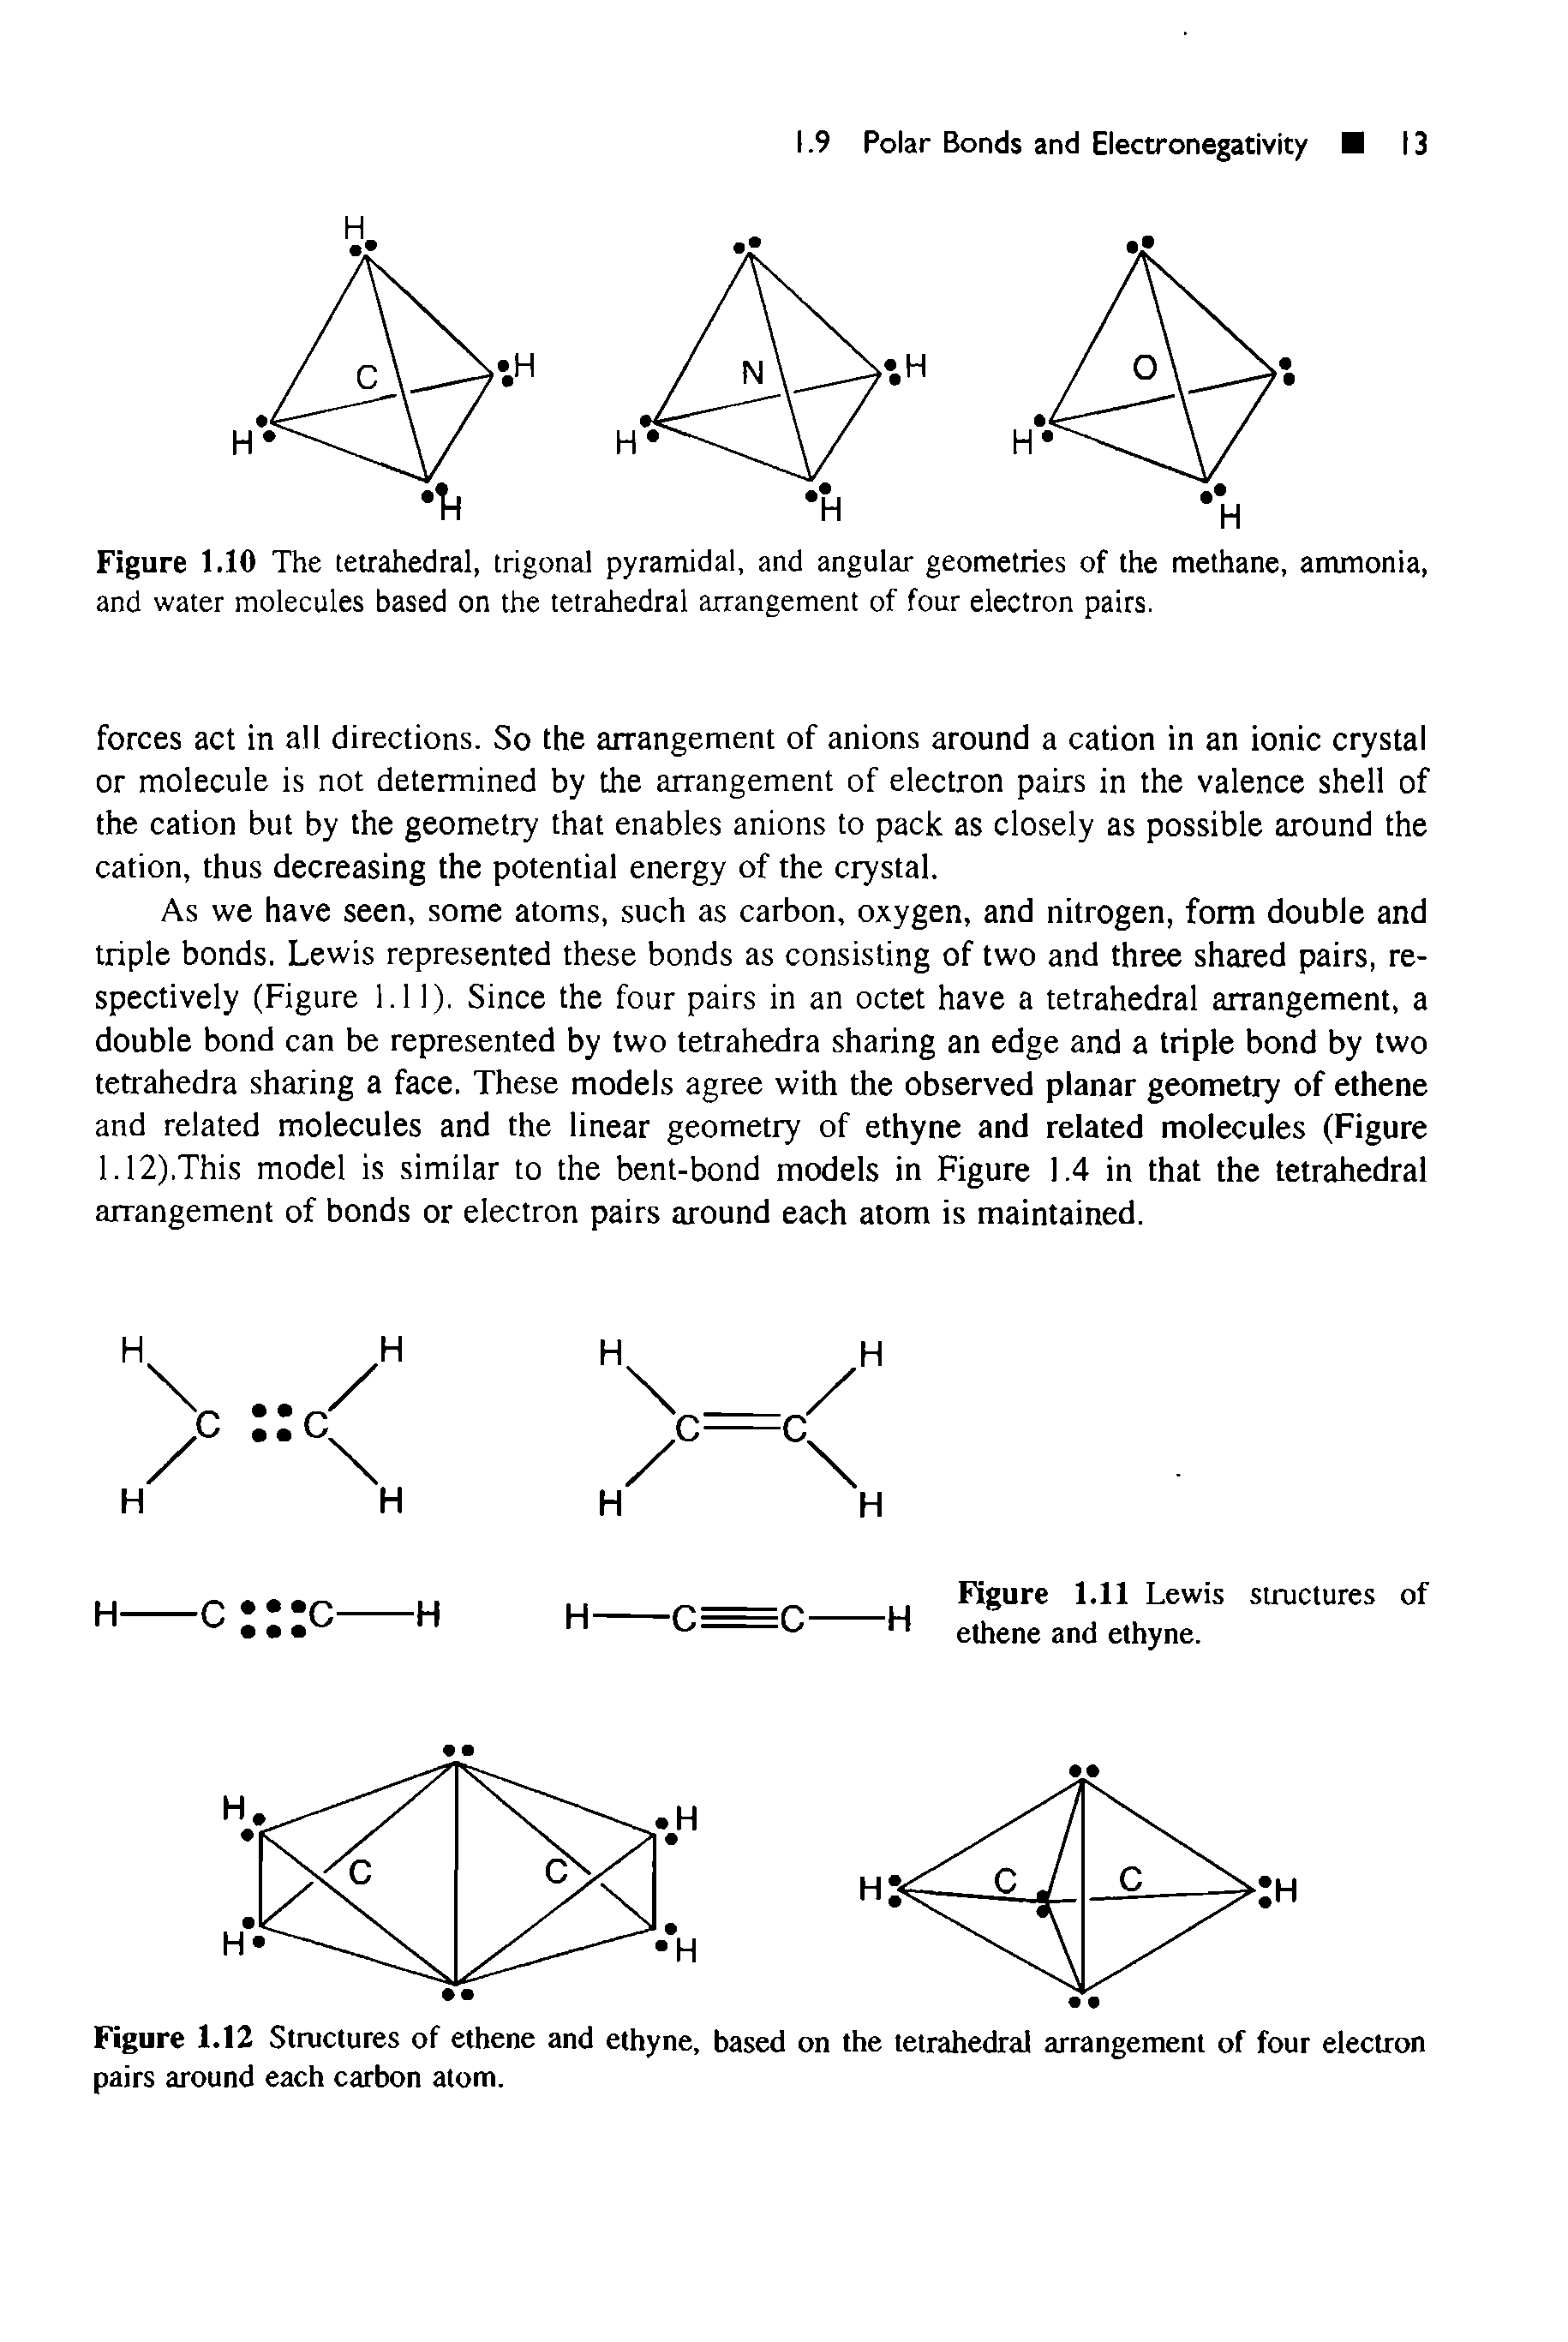 Figure 1.10 The tetrahedral, trigonal pyramidal, and angular geometries of the methane, ammonia, and water molecules based on the tetrahedral arrangement of four electron pairs.